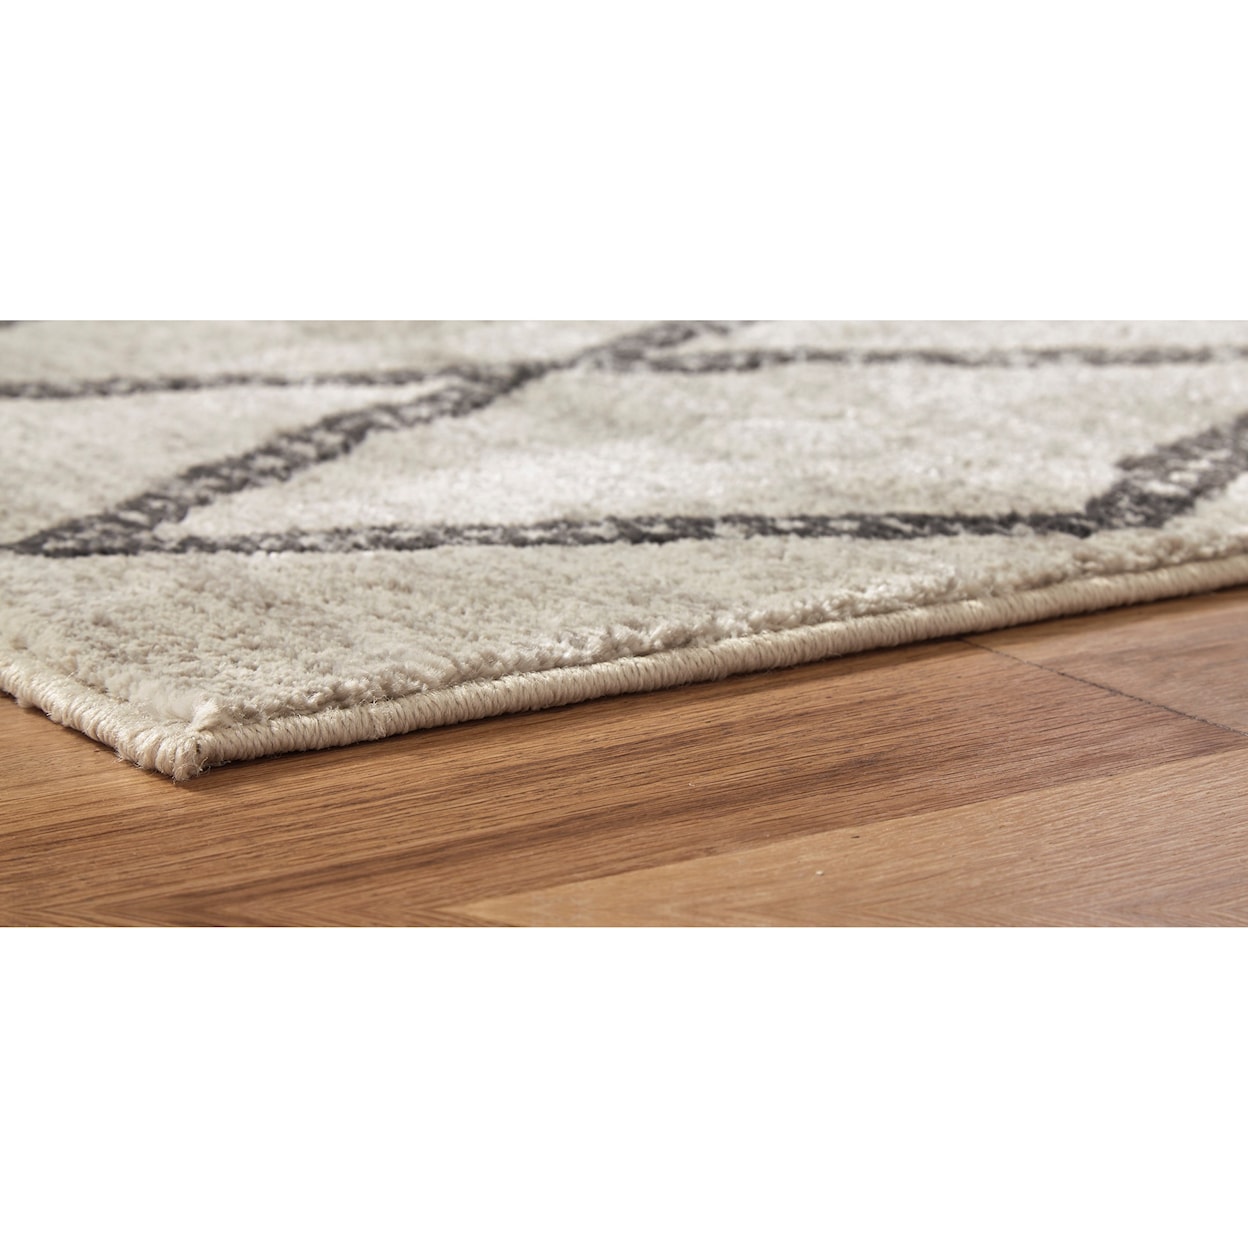 Benchcraft Casual Area Rugs Jarmo Gray/Taupe Large Rug